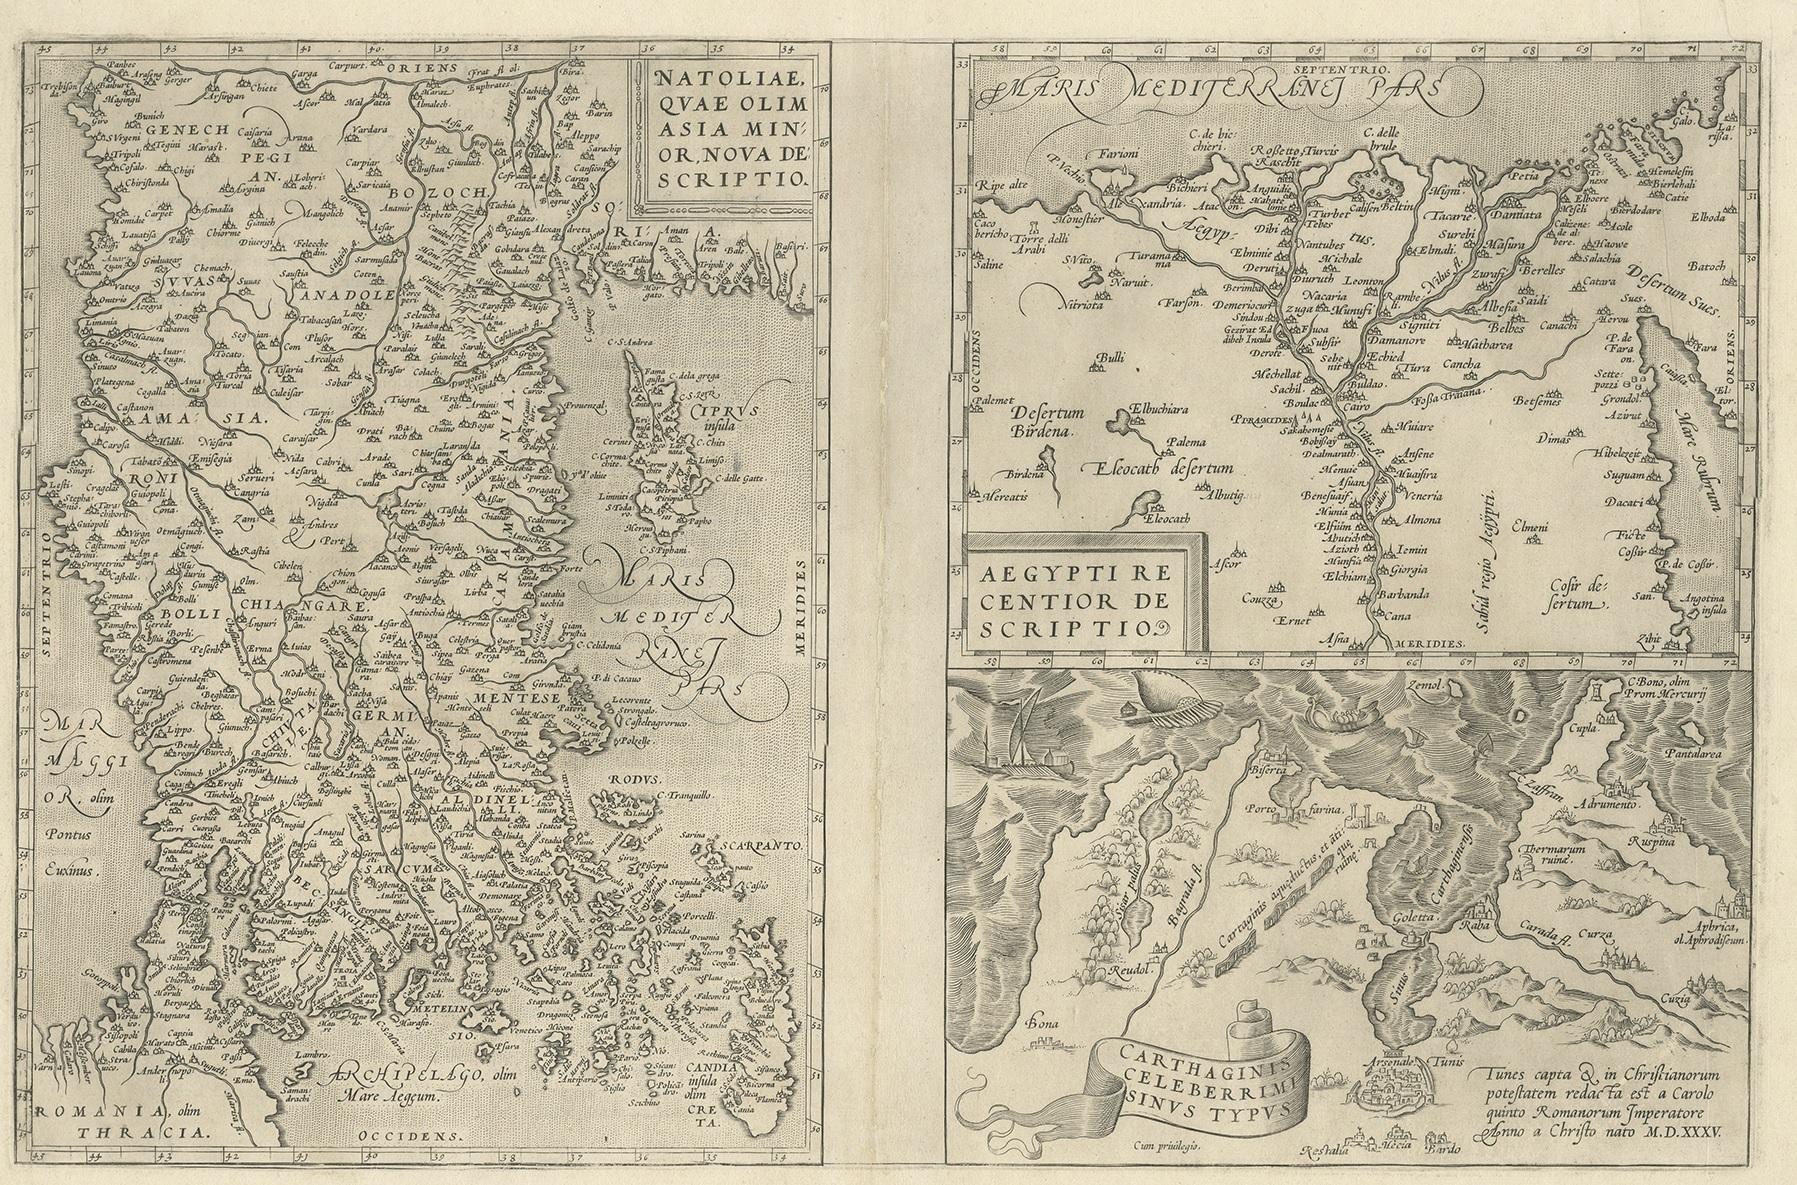 Three antique maps on one sheet titled 'Natoliae quae olim Asia Minor [with] Aegypti recentior descriptio [with] Carthaginis Celeberrimisinus Typus'. The first map covers Asia Minor, Cyprus, and the Eastern Mediterranean. The second map shows the